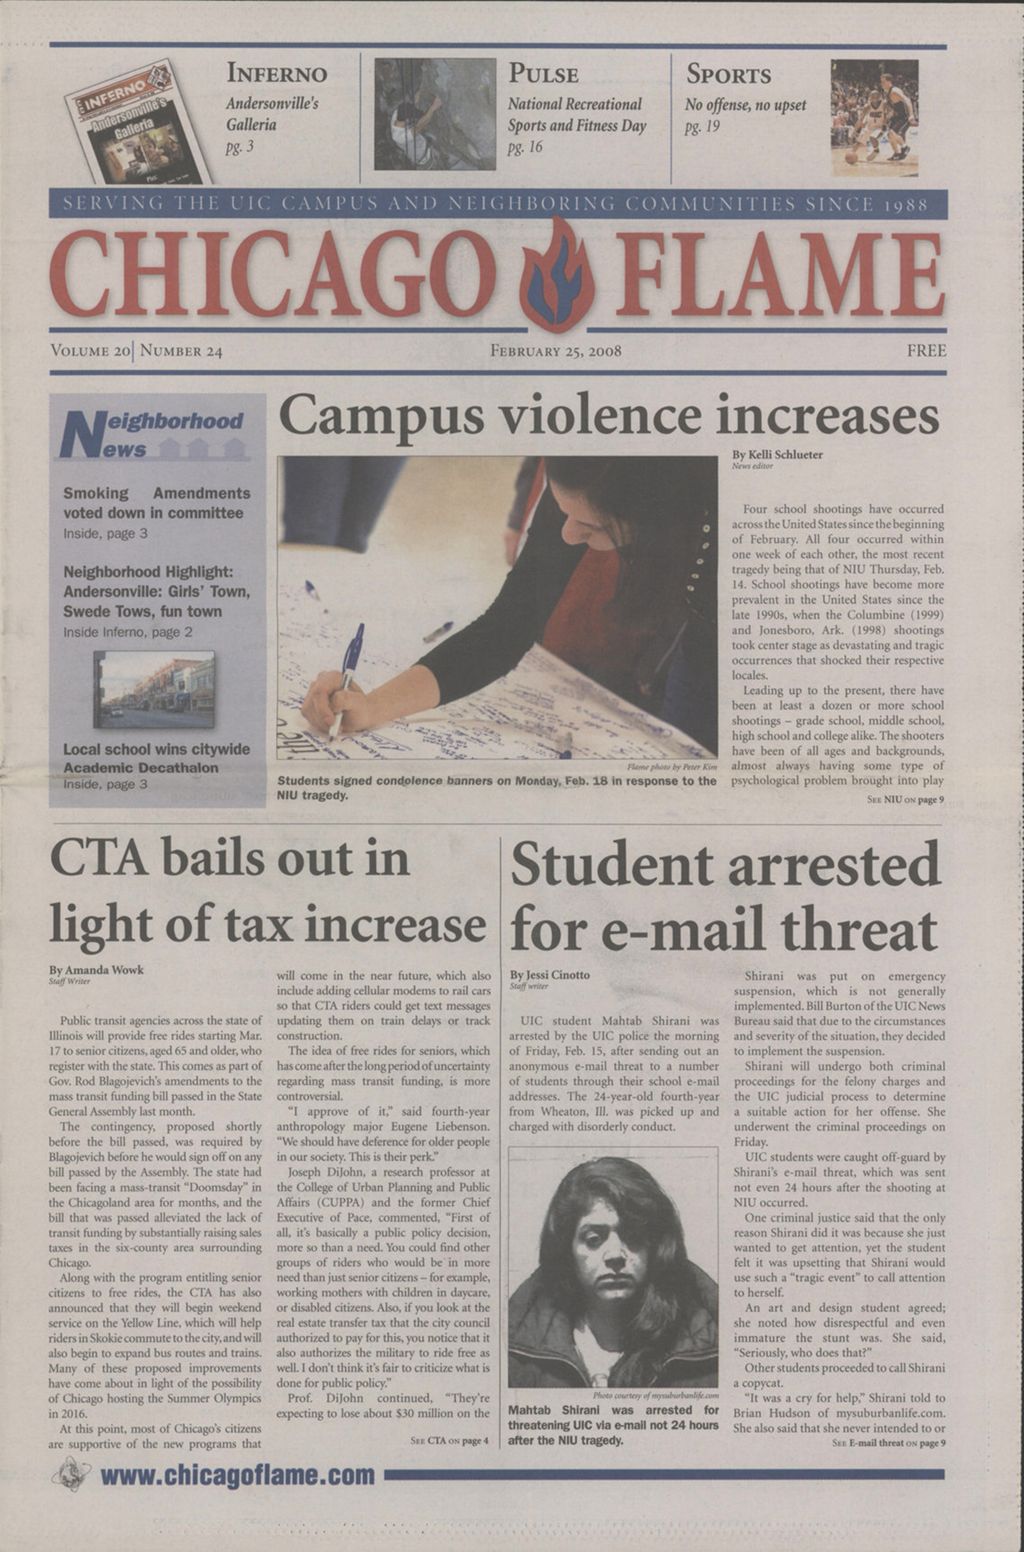 Miniature of Chicago Flame (February 25, 2008)